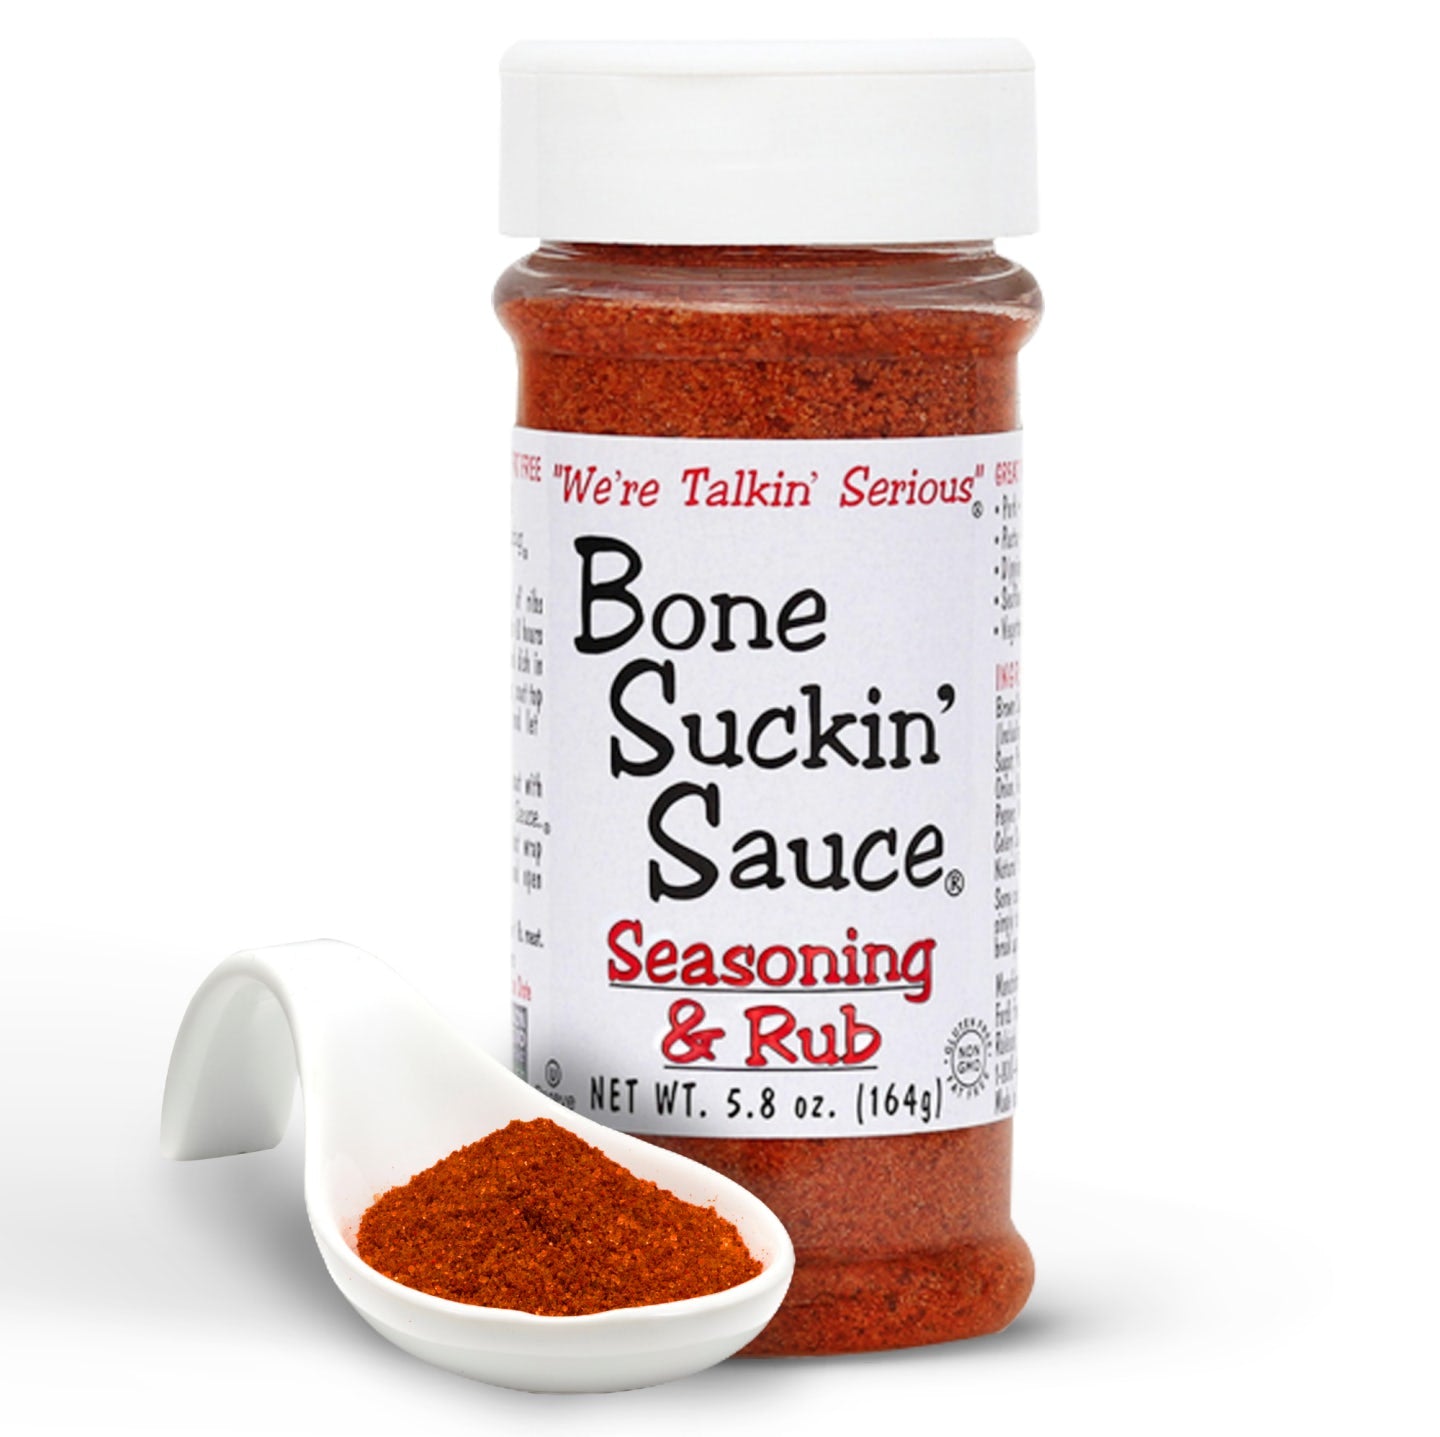 Bone Suckin'® Seasoning & Rub 5.8 oz. You will wonder how you ever lived without it! Bone Suckin'® Seasoning & Rub is a proprietary blend of brown sugar, paprika, garlic and spices that is perfect for marinating and BBQ – even popcorn and salad